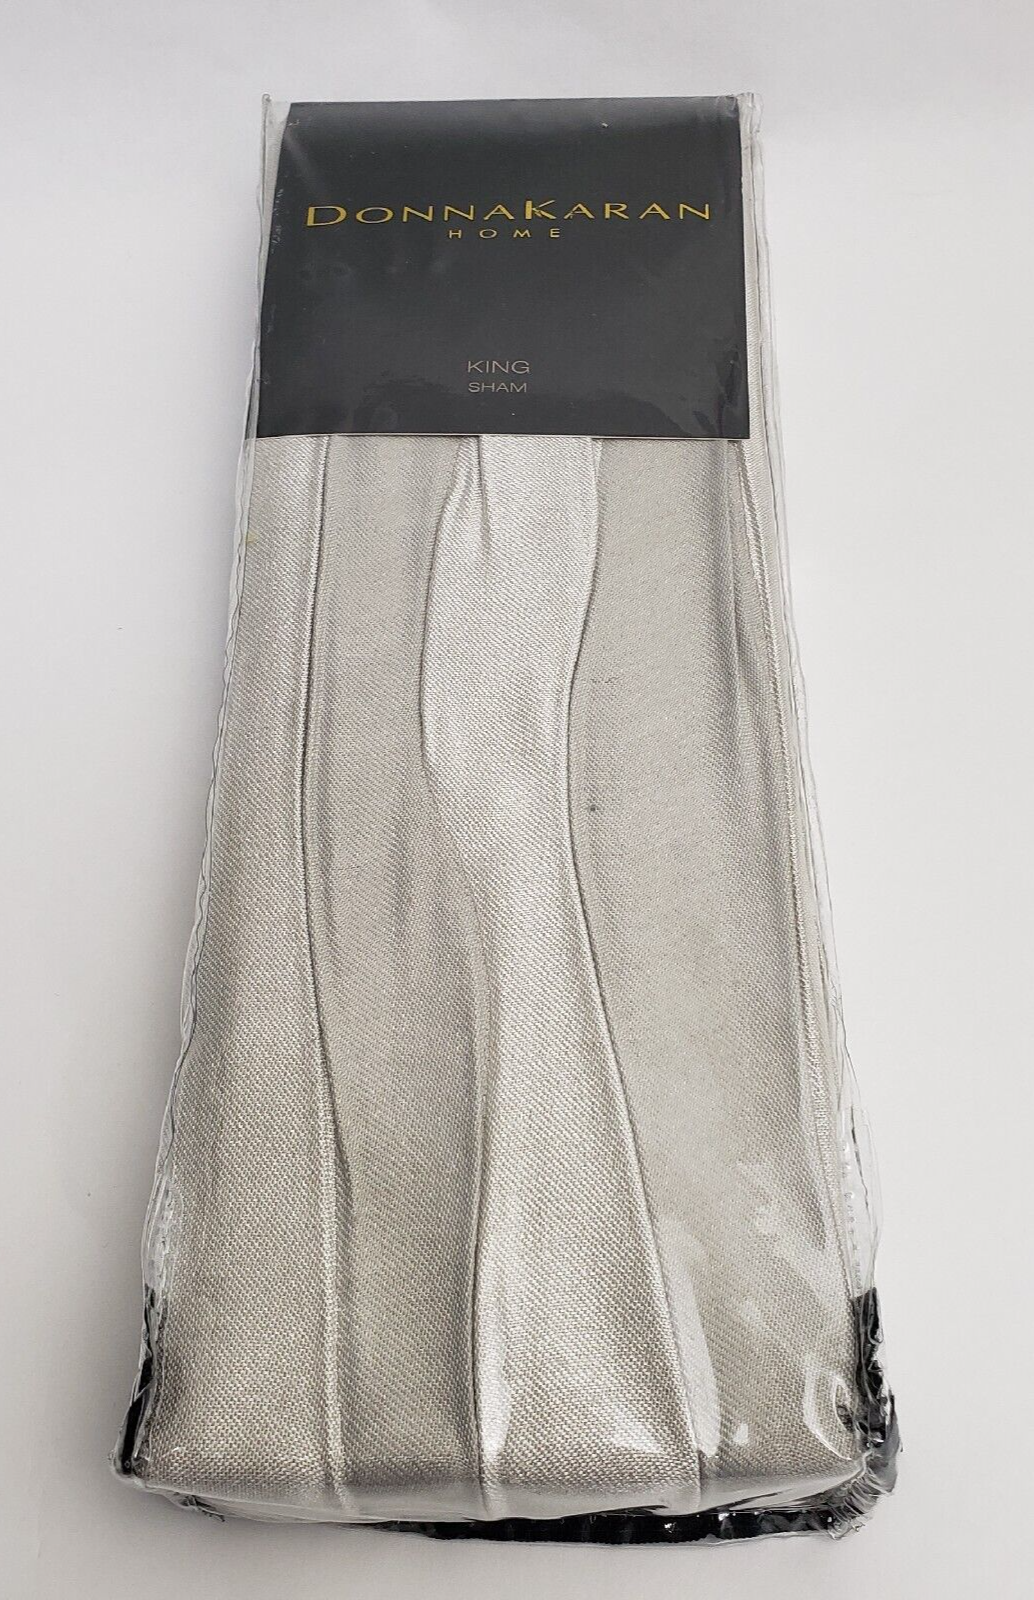 Donna Karan Home King Pillow Sham Silver Tidal Collection Two Tone Pleated - $59.35